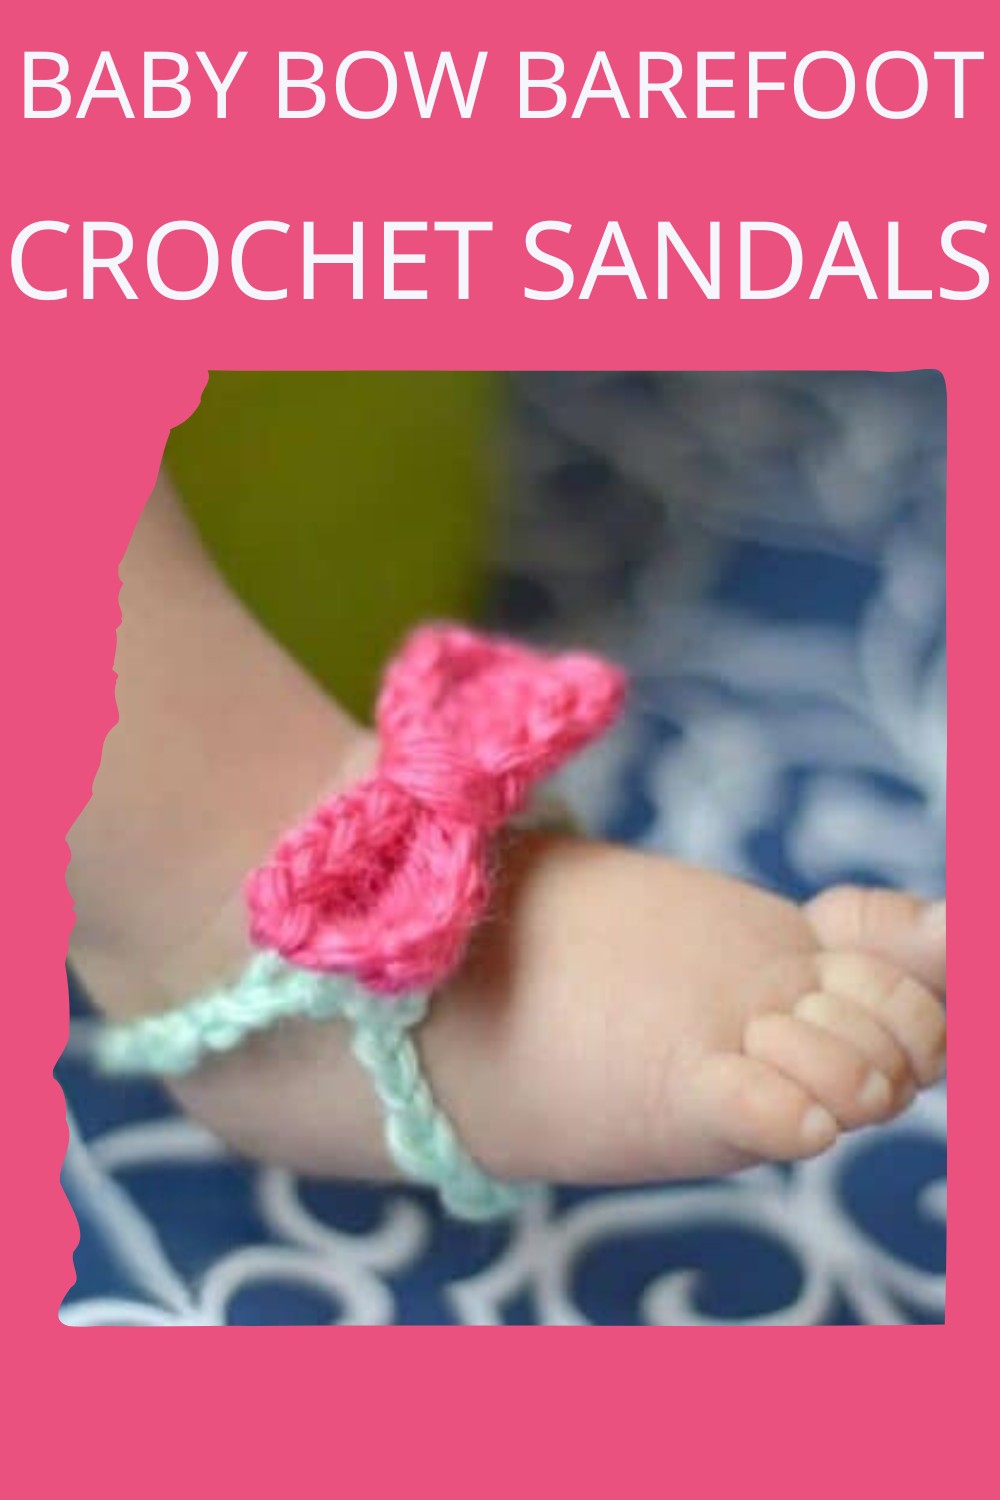 Baby Bow Barefoot Crochet Spring Sandals Pattern